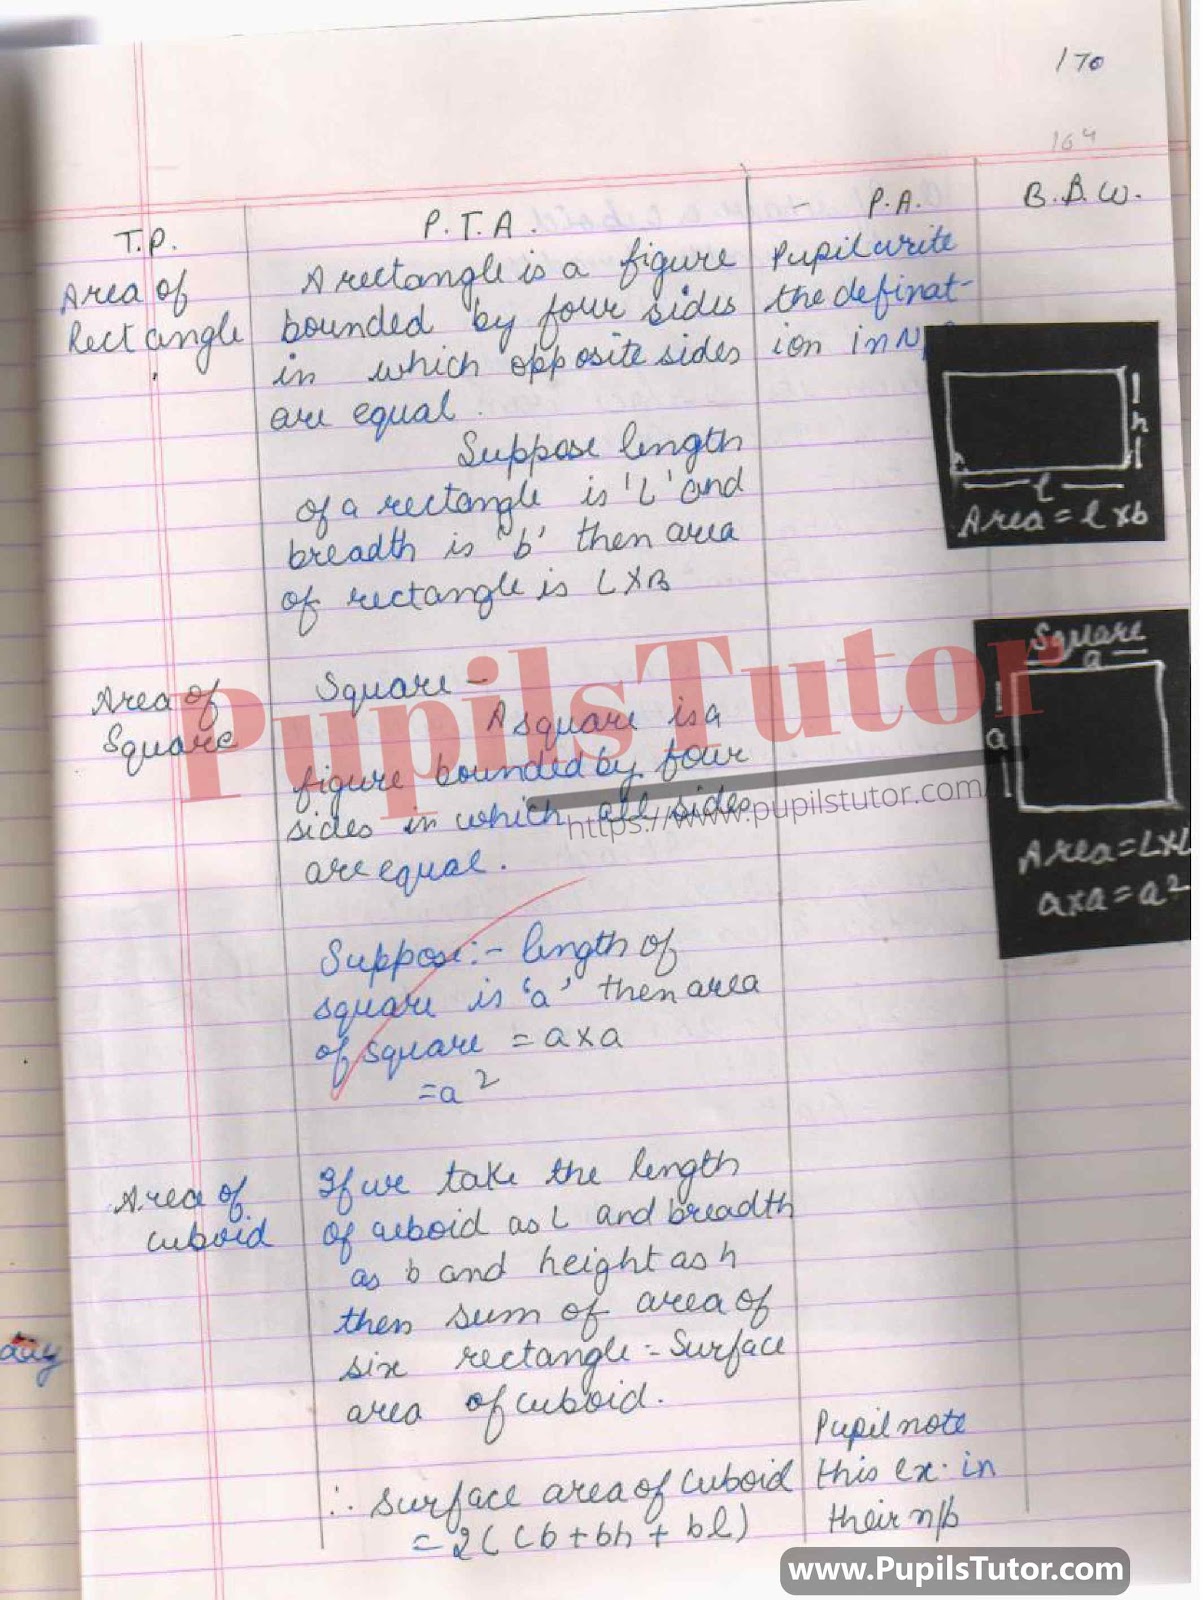 Class/Grade 8 And 9 Mathematics Lesson Plan On Area Of Rectangle, Square, Cube And Cuboid For CBSE NCERT KVS School And University College Teachers – (Page And Image Number 3) – www.pupilstutor.com